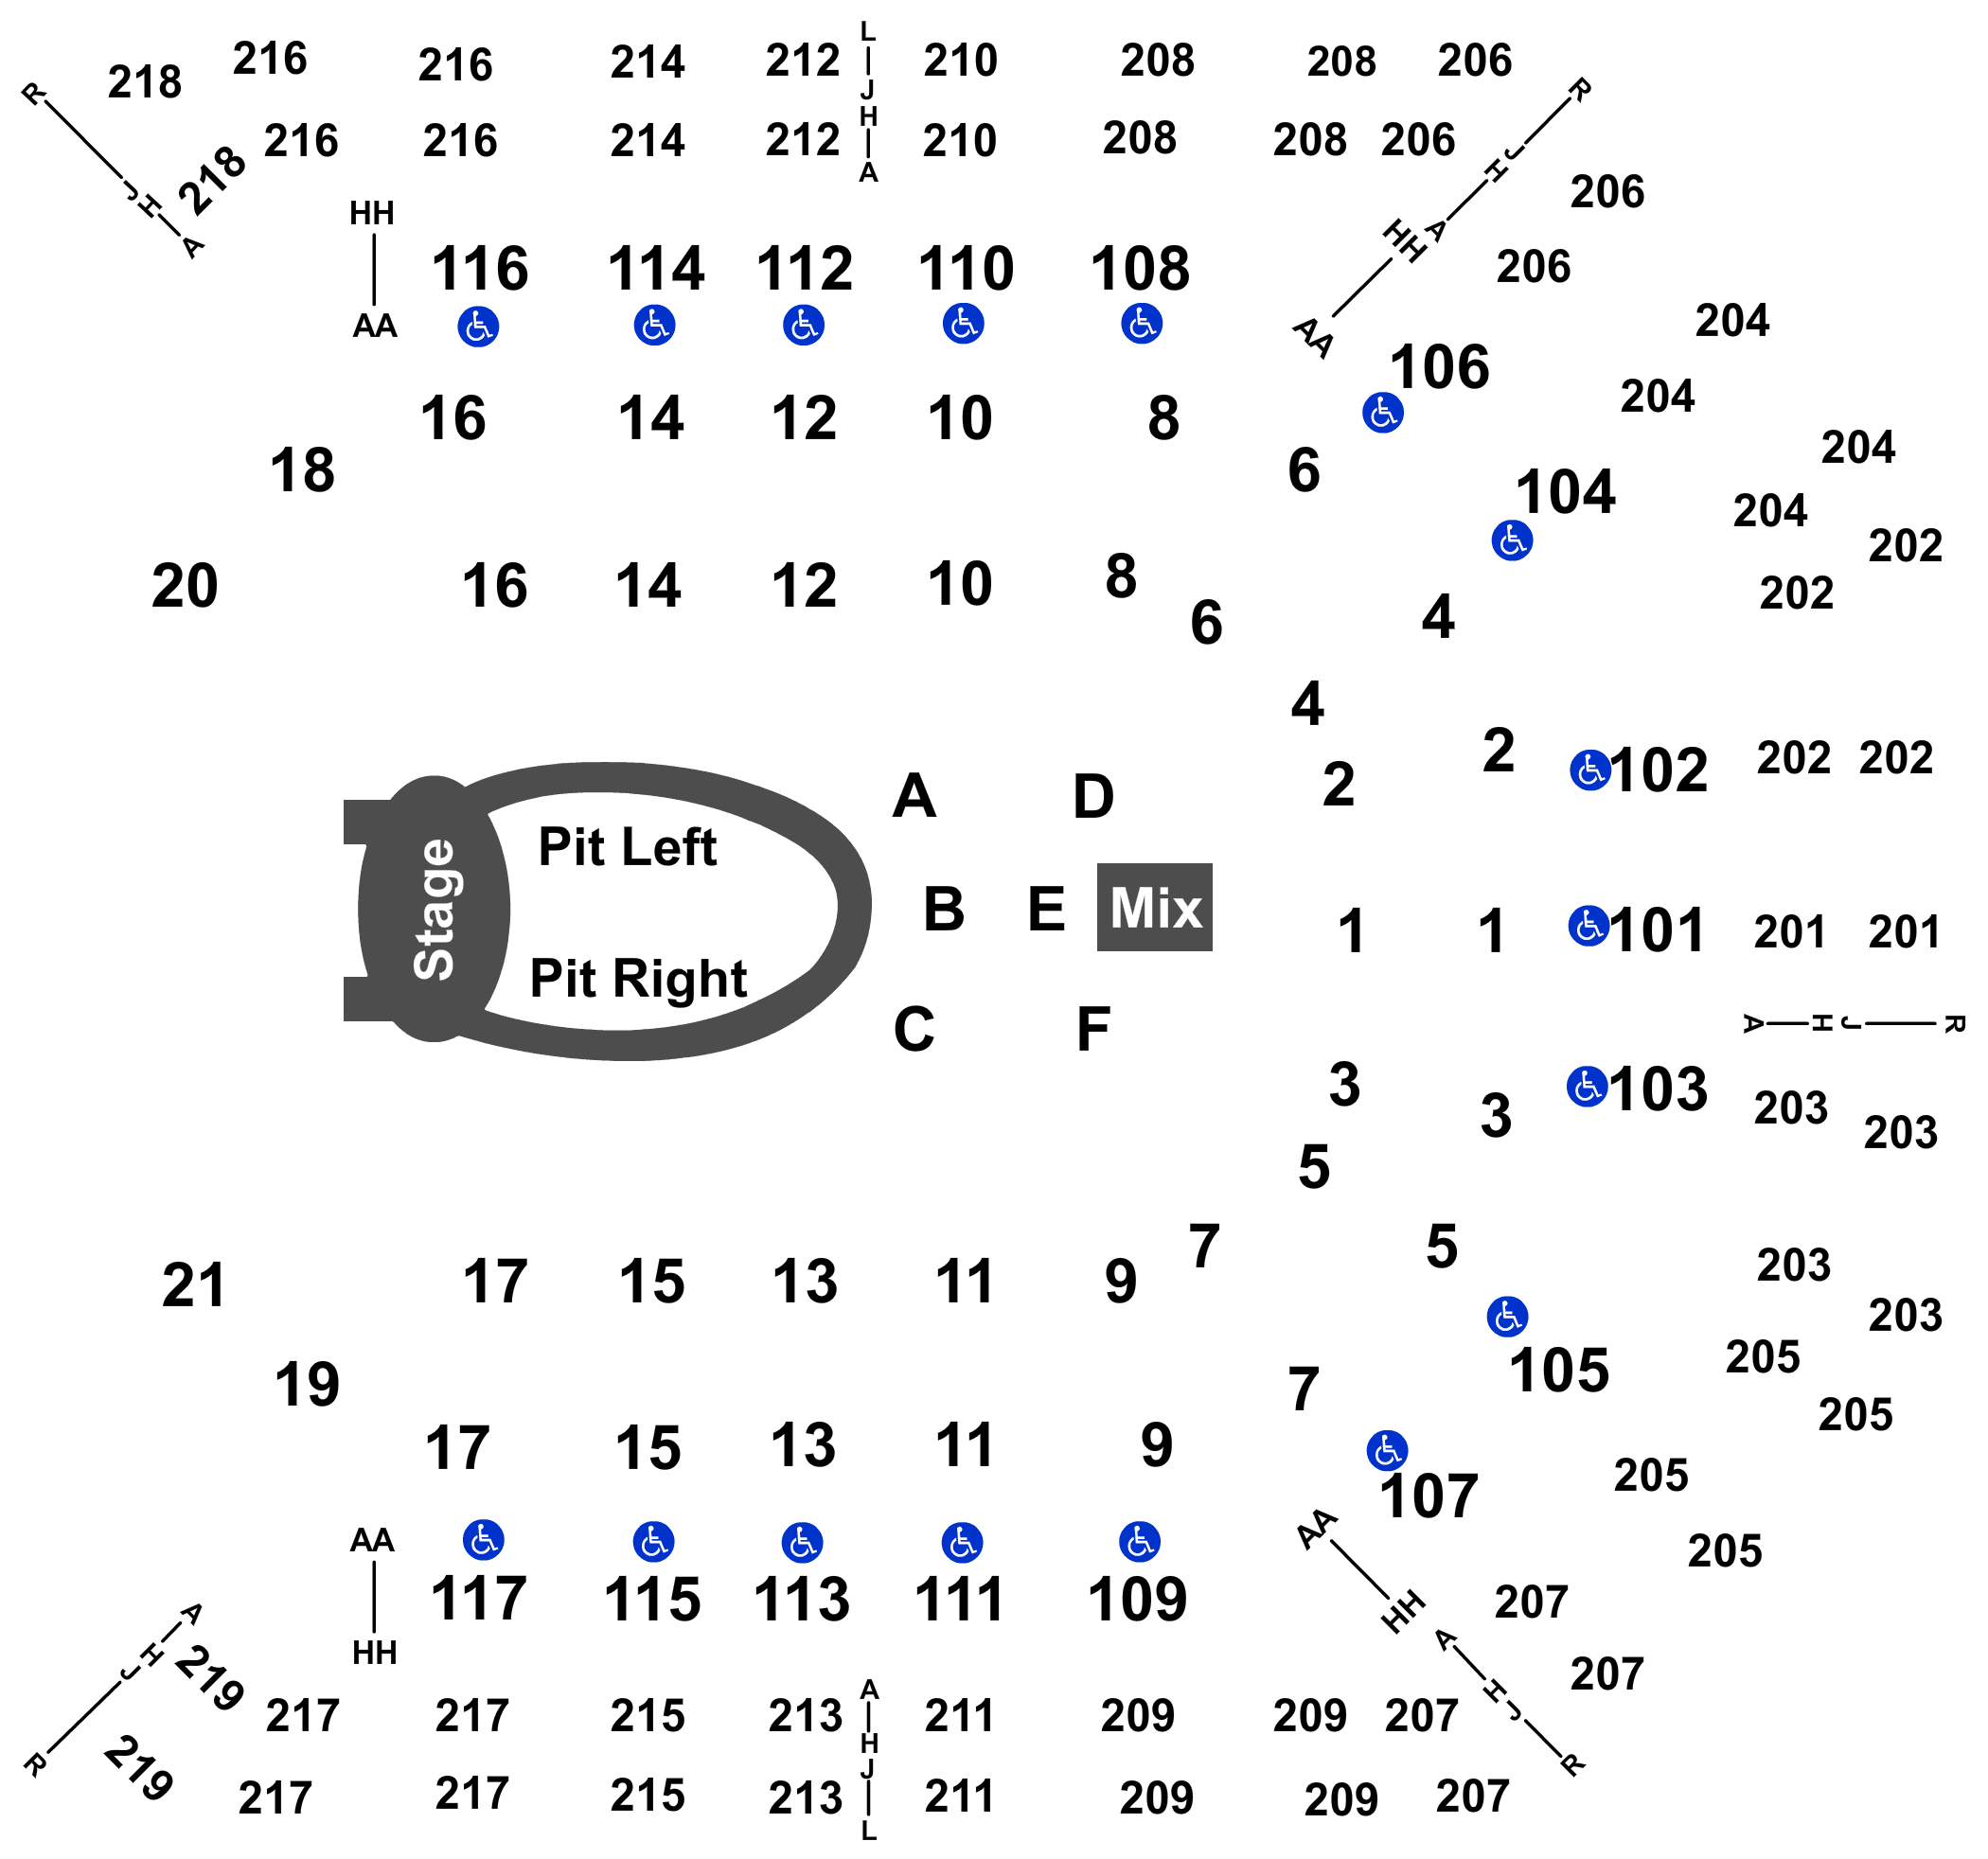 Mgm Grand Grand Garden Arena Seating Chart